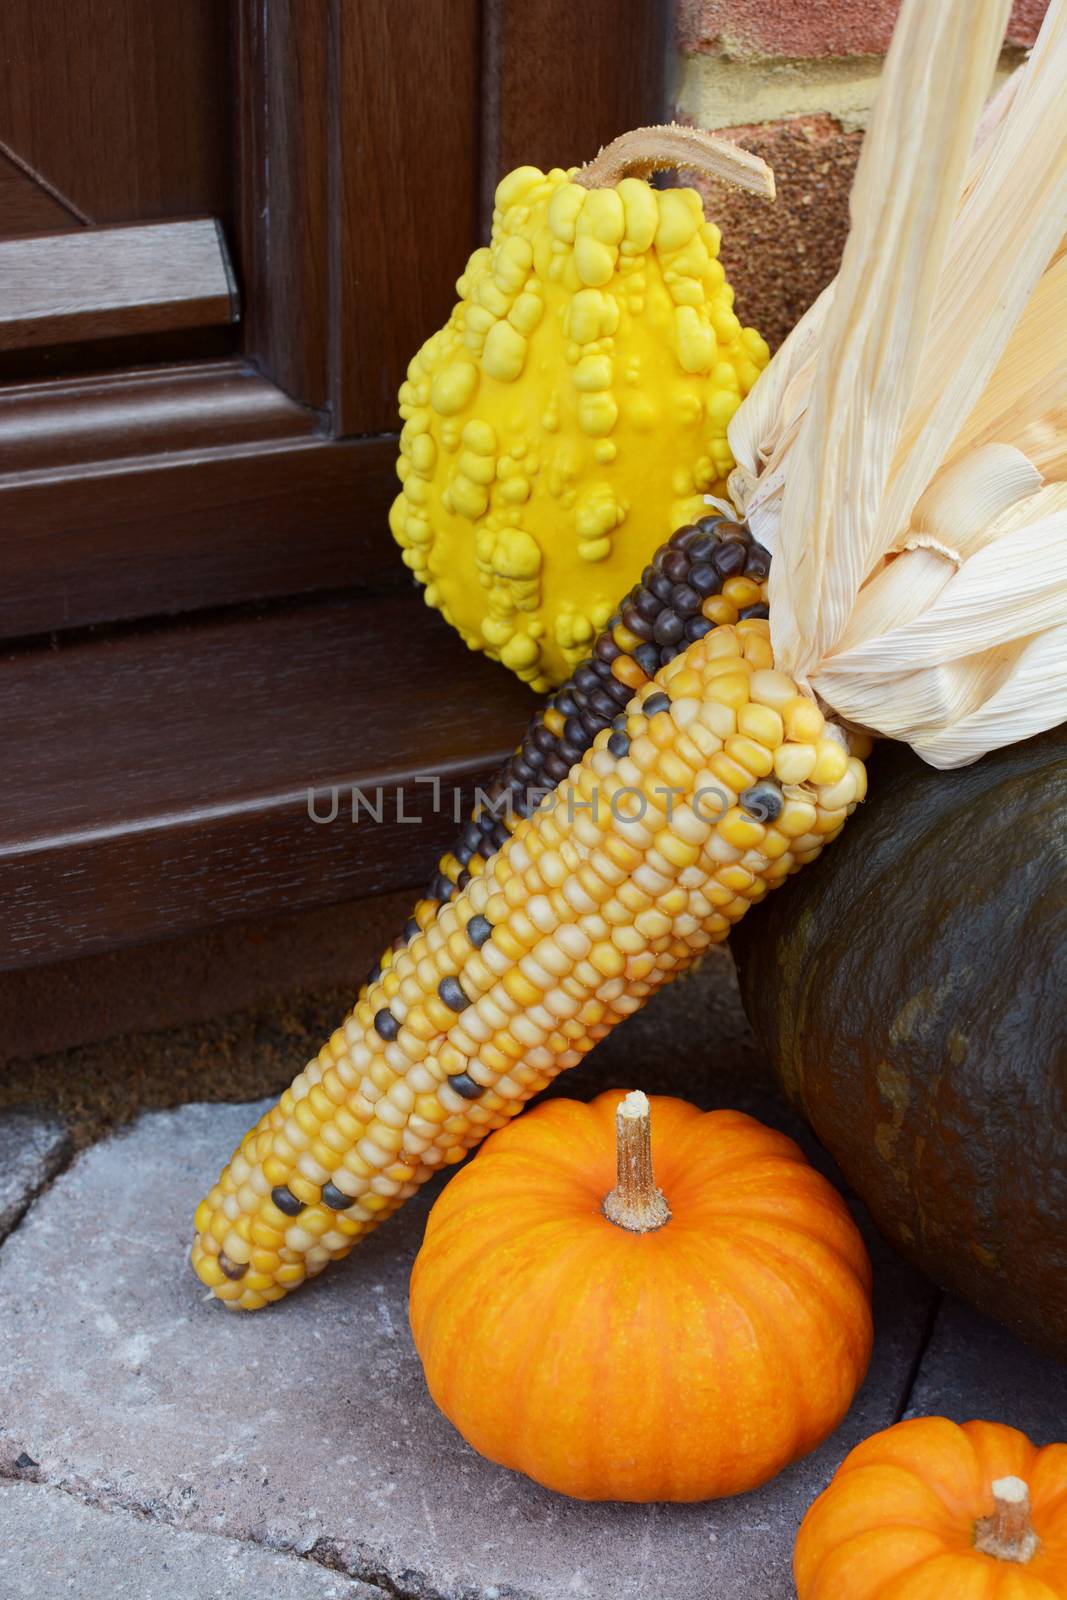 Ornamental sweetcorn and gourds as a Thanksgiving decoration by sarahdoow